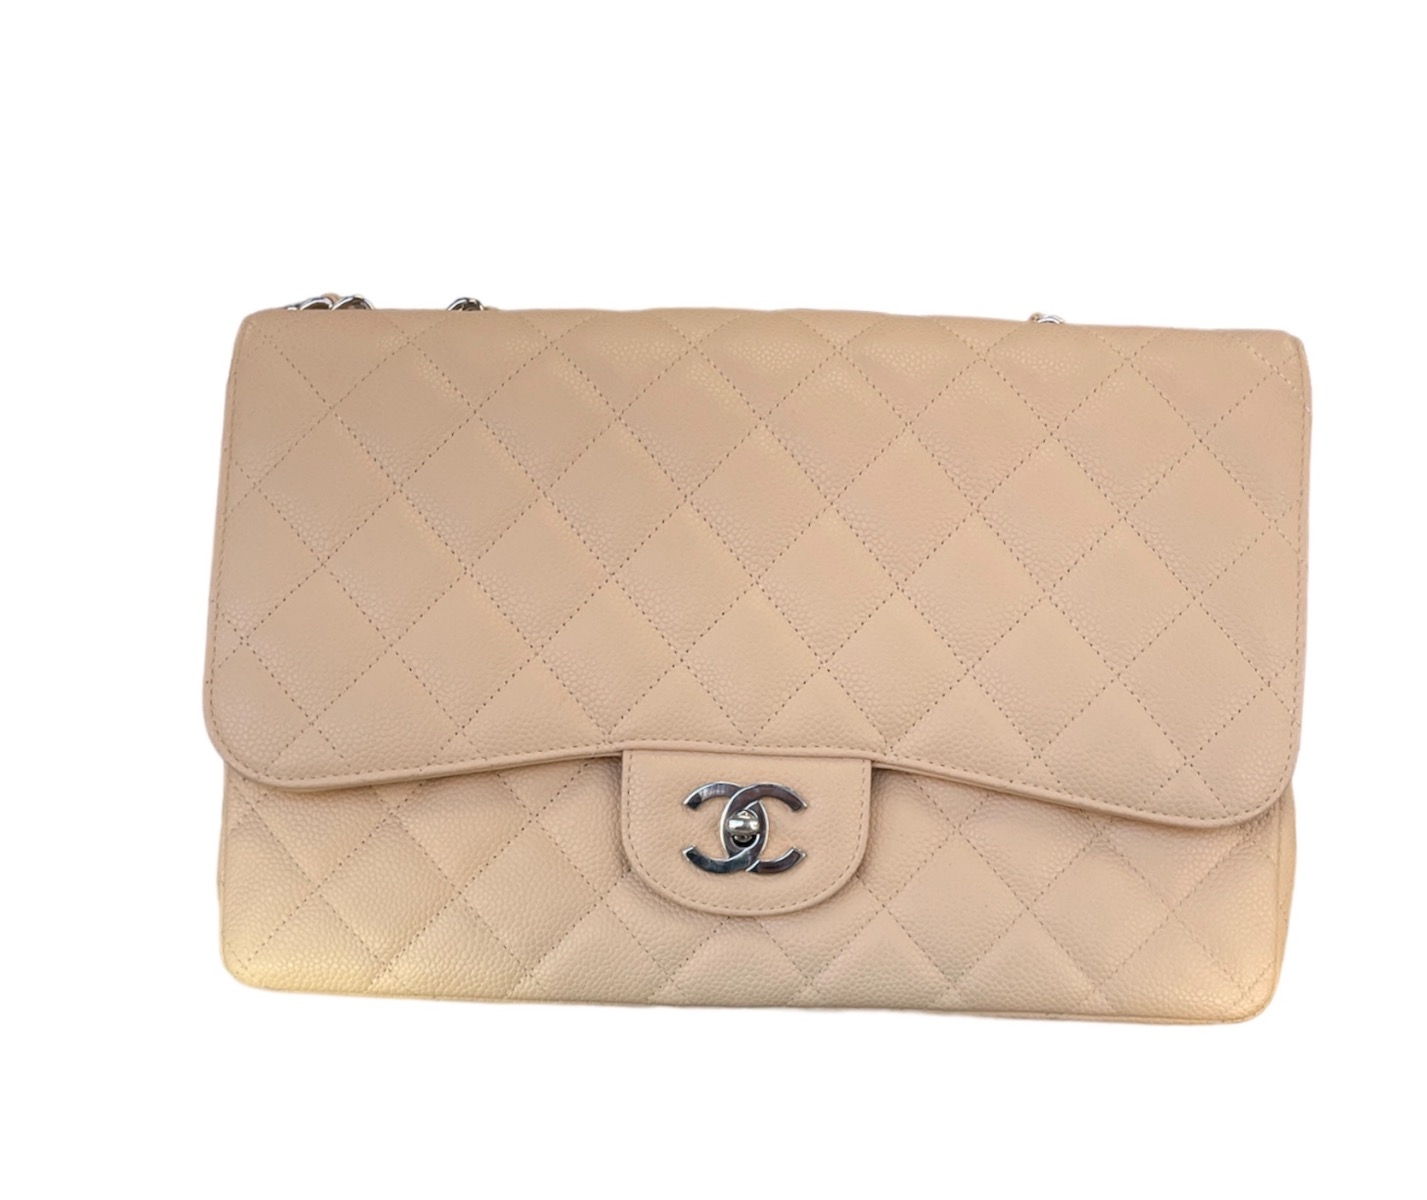 Chanel Beige Quilted Caviar Leather Single Flap Jumbo Bag at the